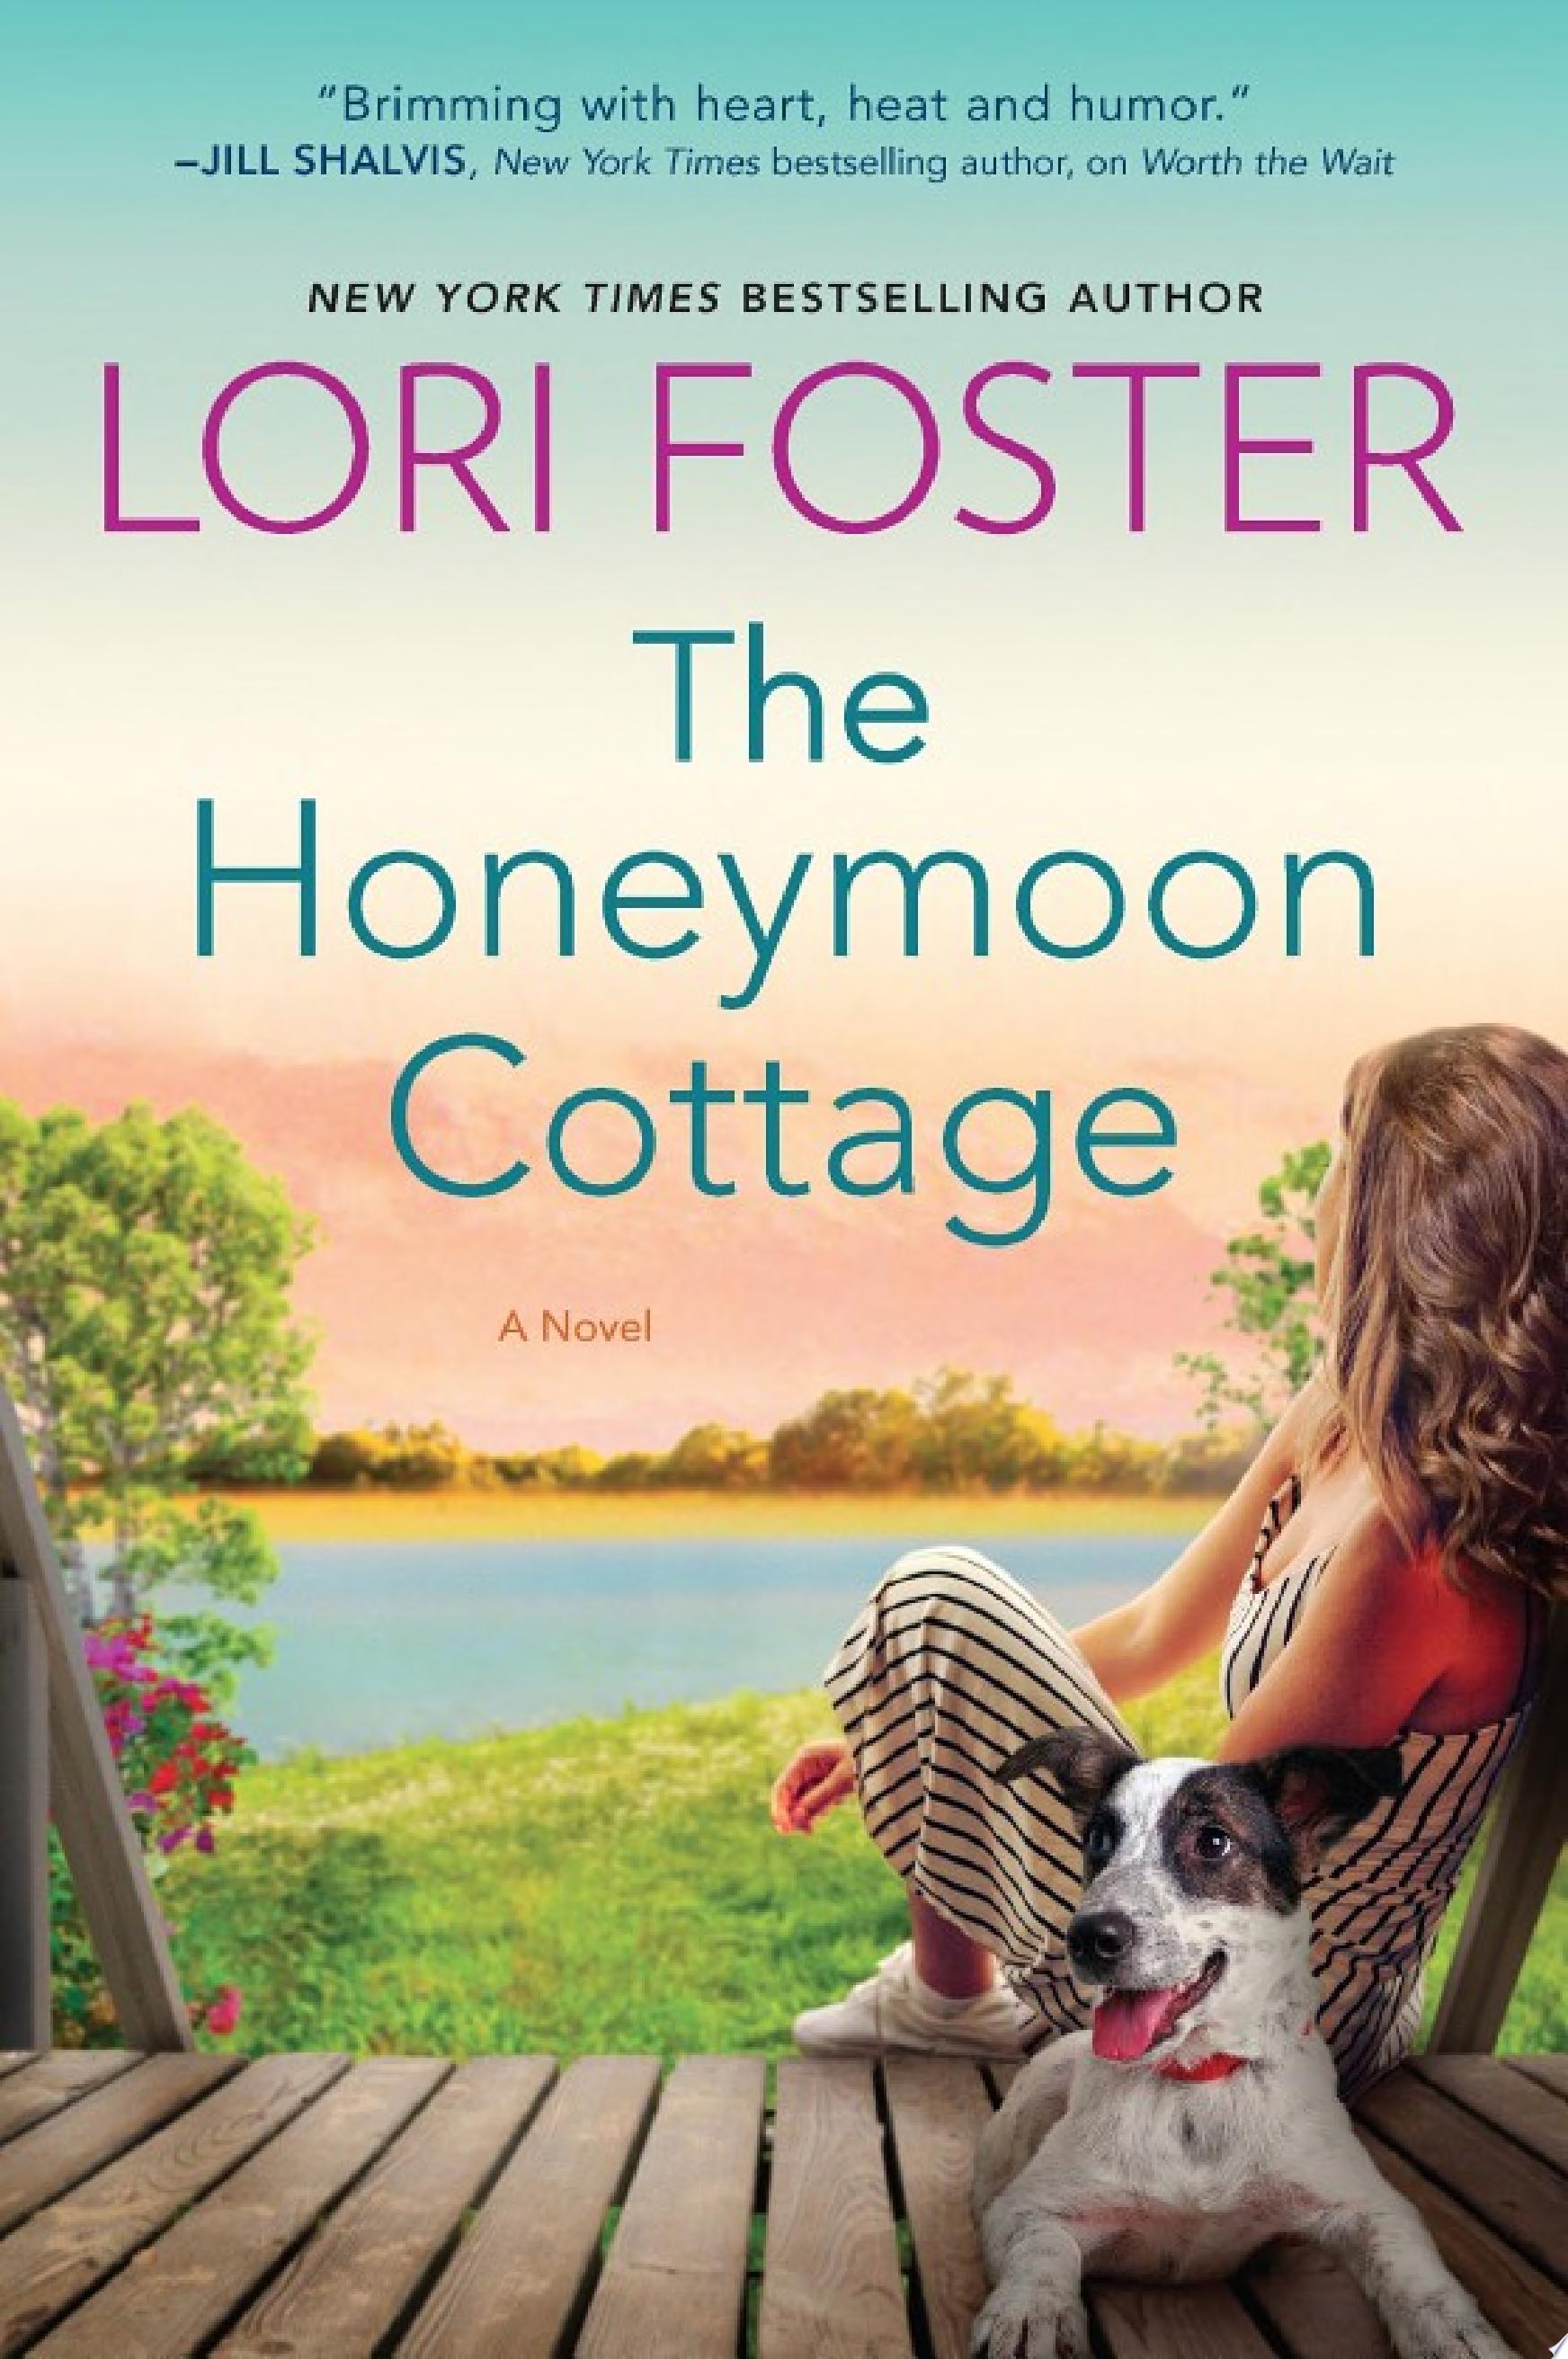 Image for "The Honeymoon Cottage"